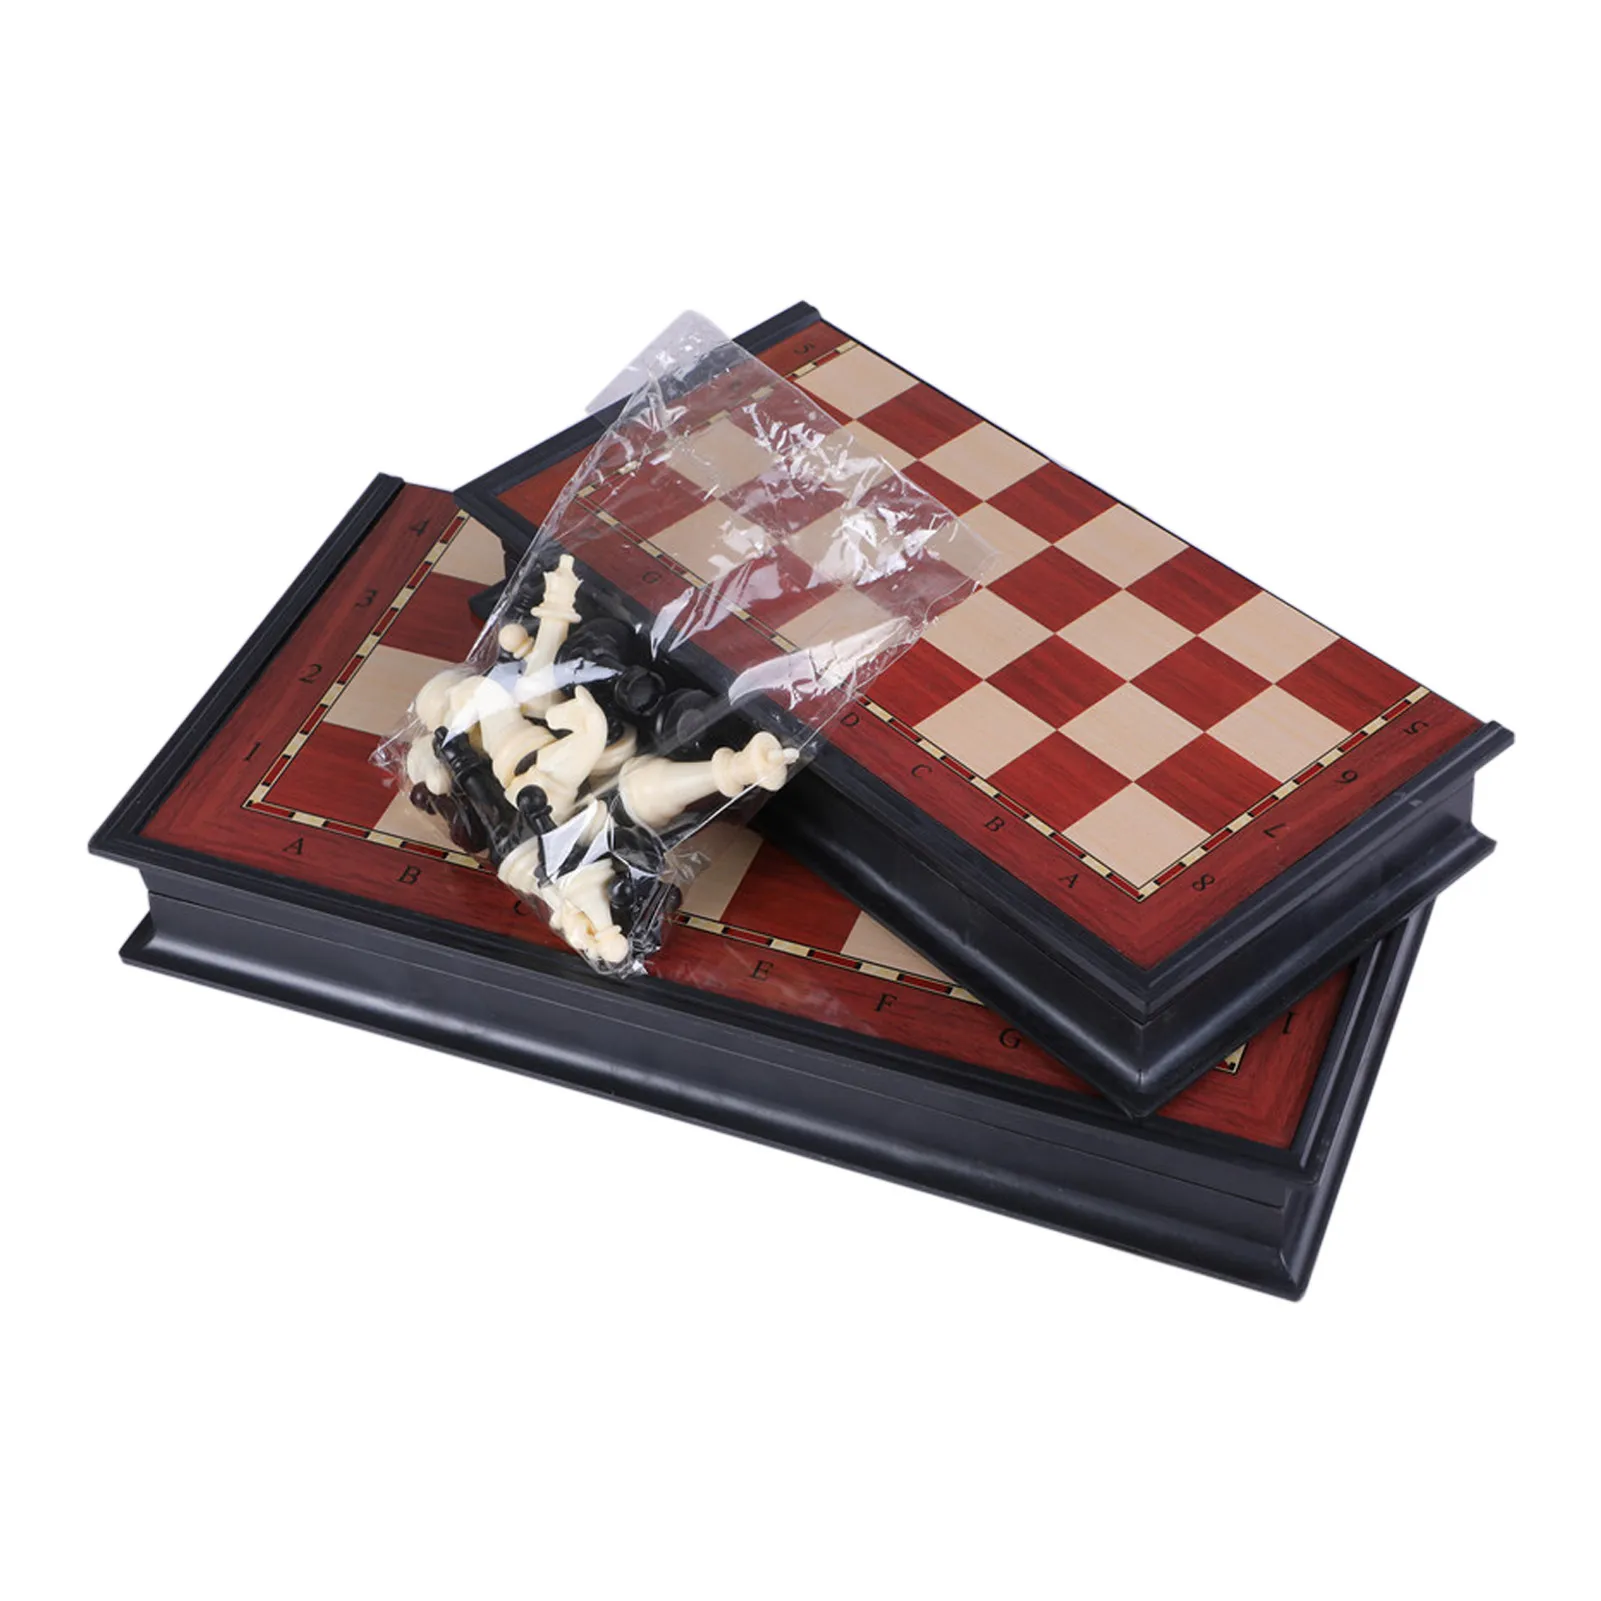 Hot Hight Quality Wooden Folding Large Chess Set Solid Wood Chessboard Entertainment Board Games Children Gift 6